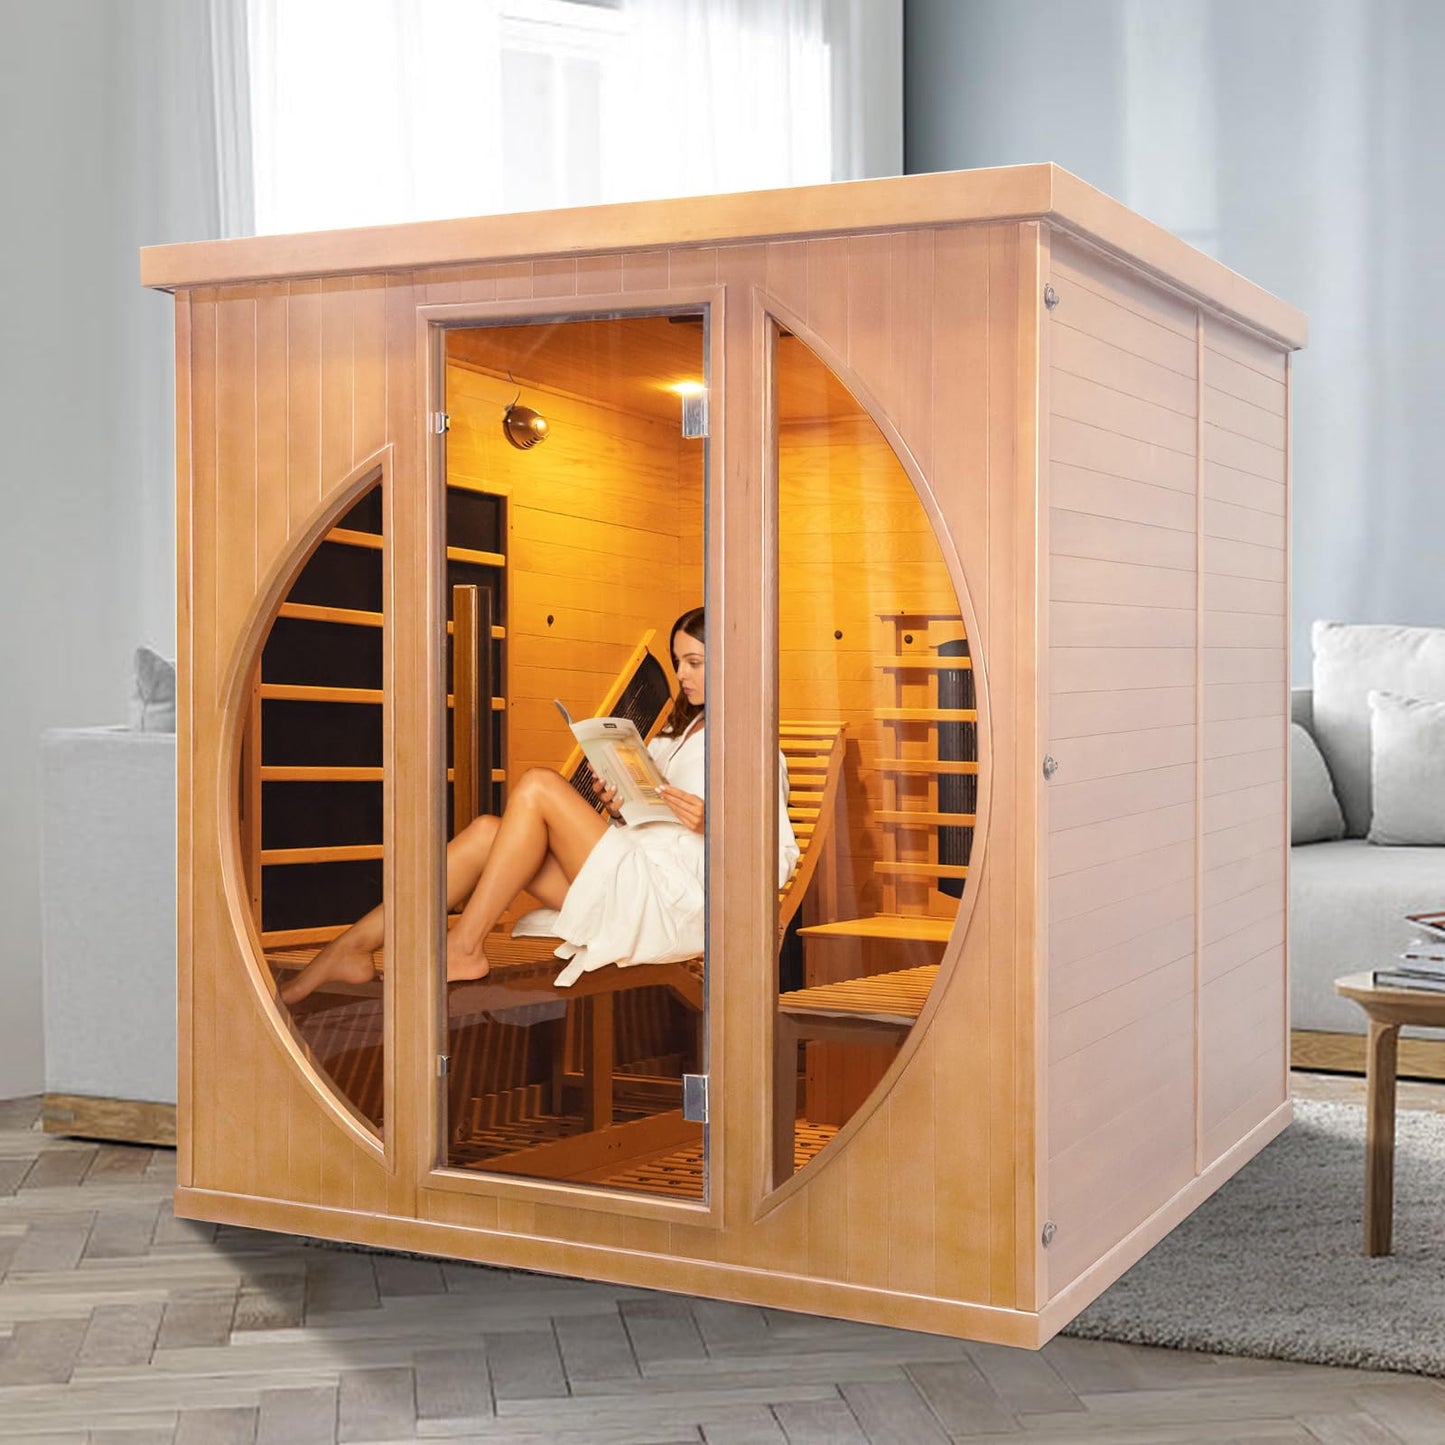 TaTalife Infrared 2 Person Wooden Sauna Room, Luxurious Sauna with Recliner, 3400W Dry Heat Sauna for Home, 9 Heating Panels, Bluetooth Speaker, 7Color Lights, Oxygen Bar, 220V(Canadian Hemlock)